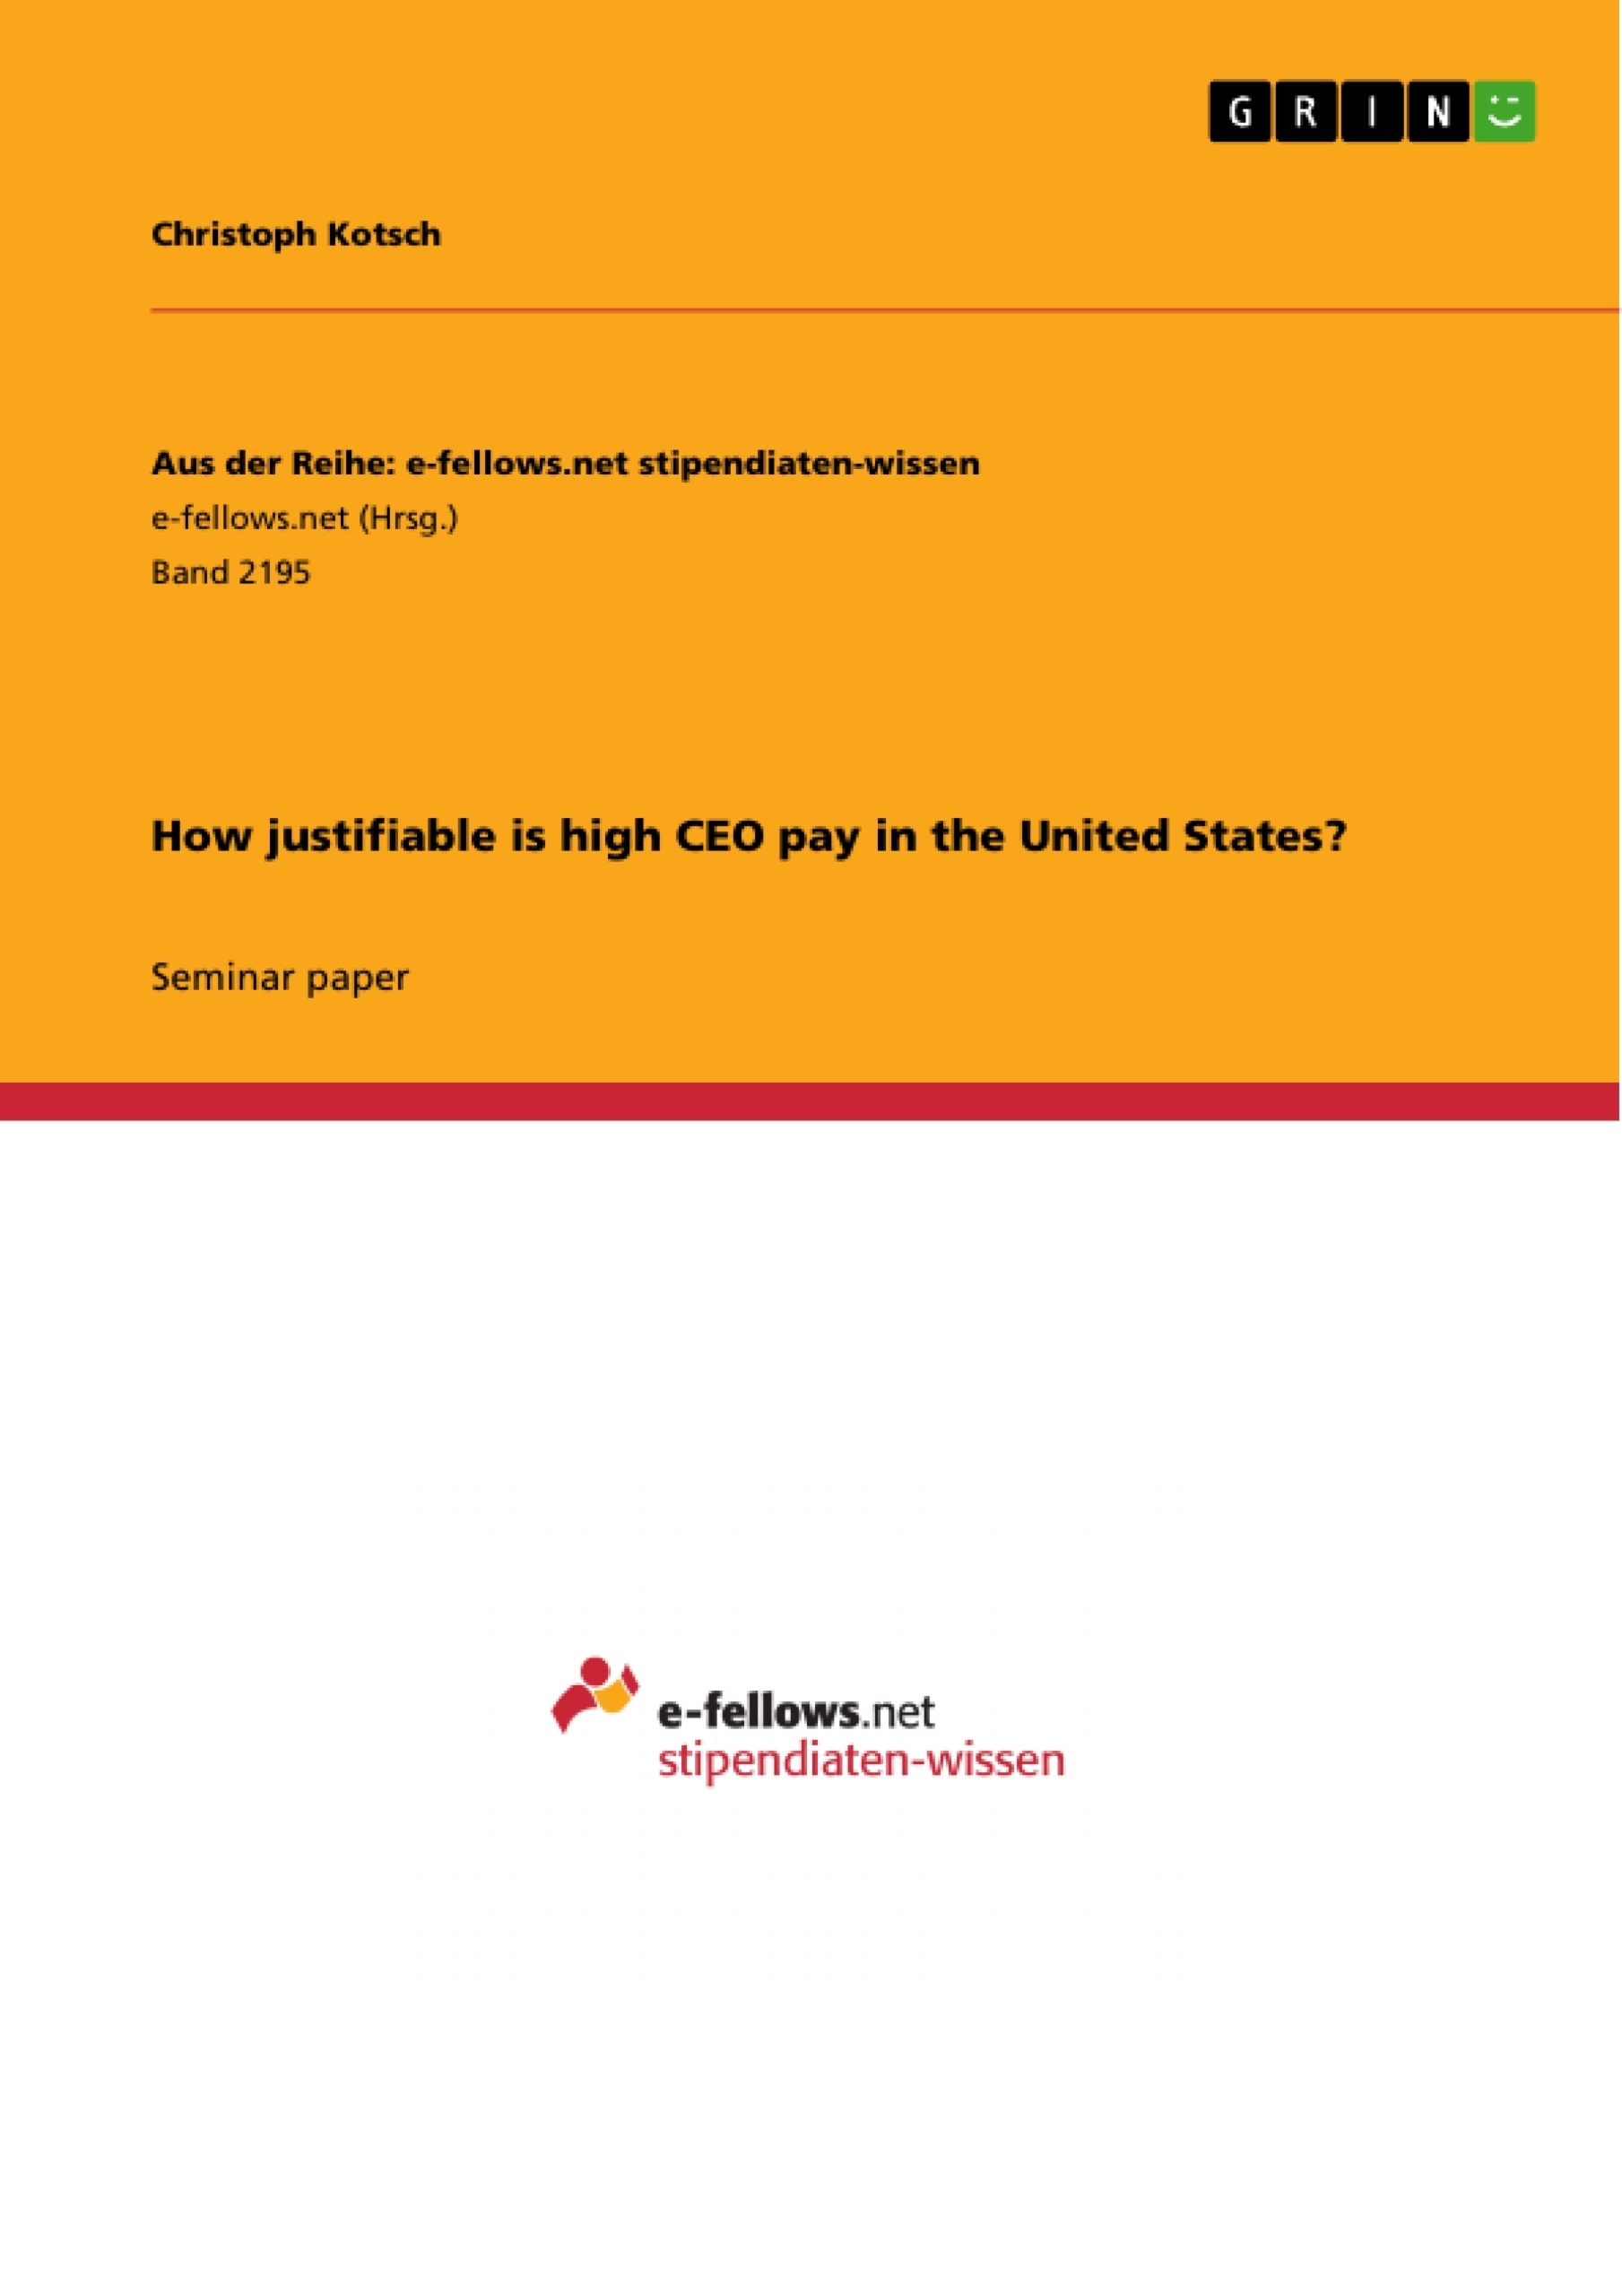 Título: How justifiable is high CEO pay in the United States?